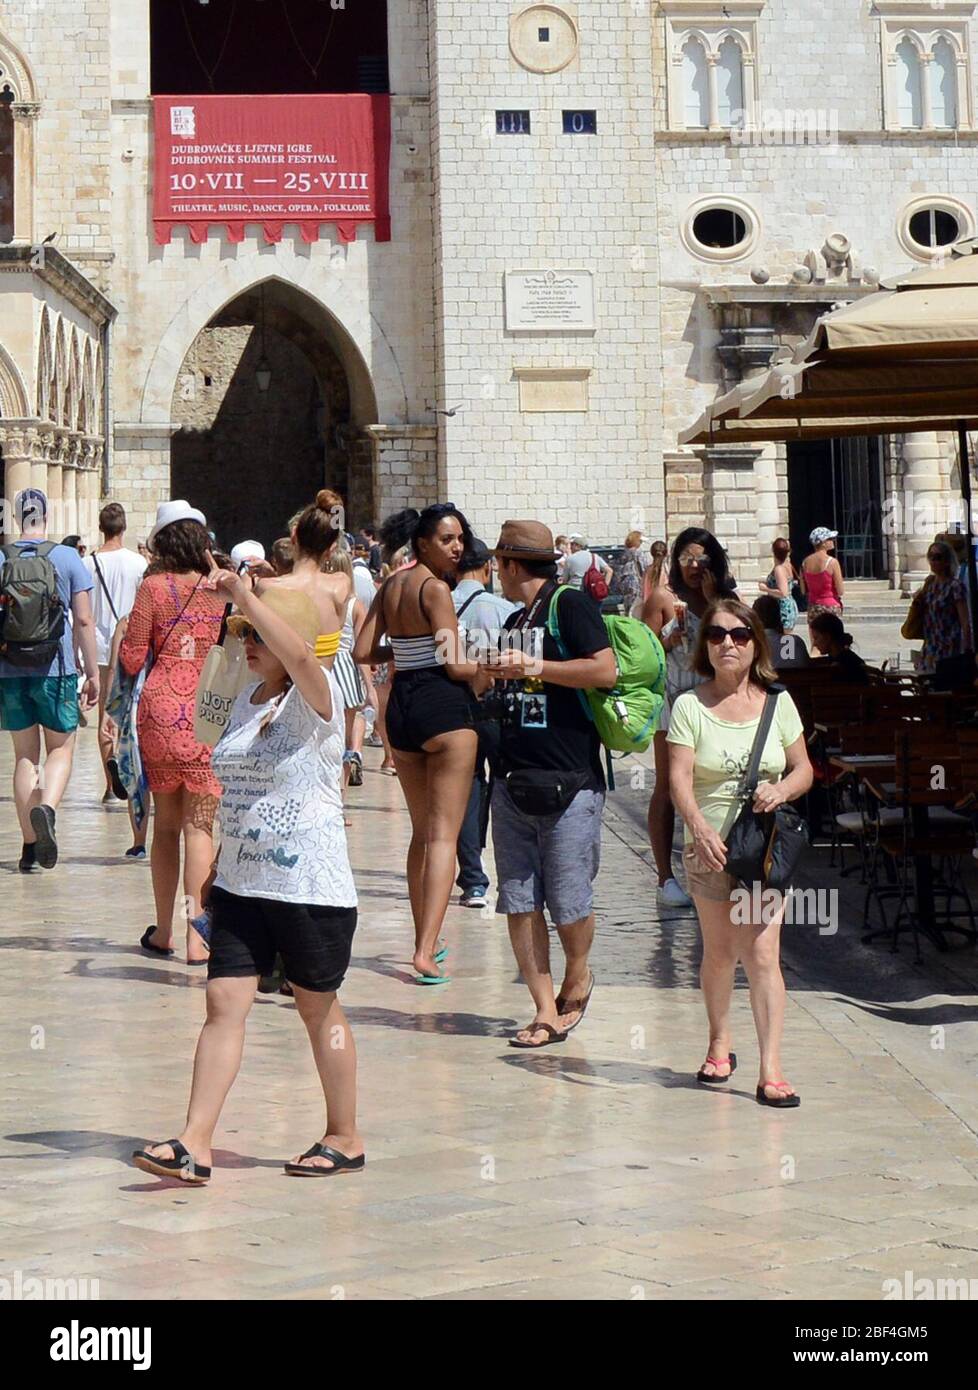 Man & woman exchanging words in Dubrovnik's old town. Stock Photo